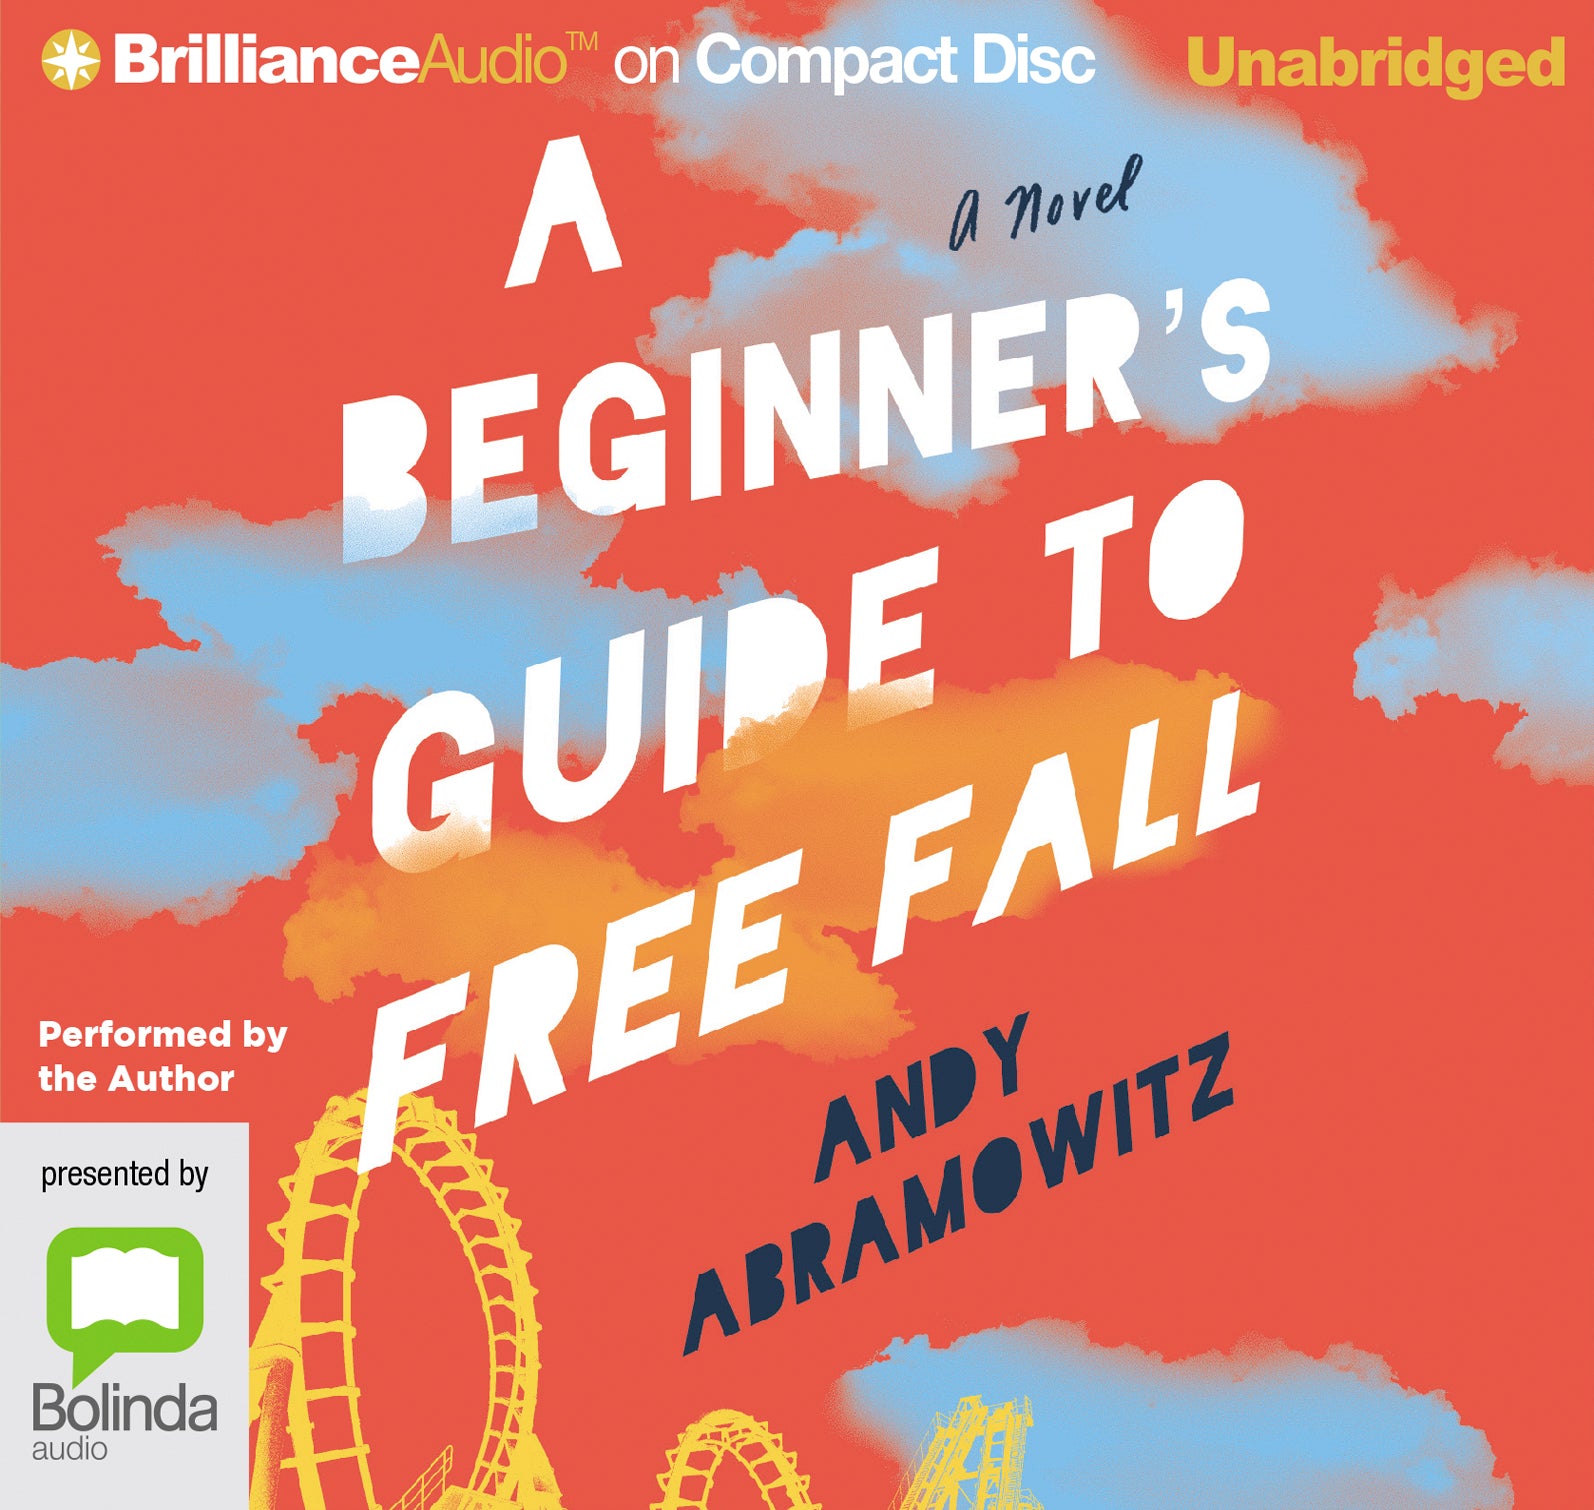 A Beginner's Guide To Free Fall - Unbridged Audio Book on CD